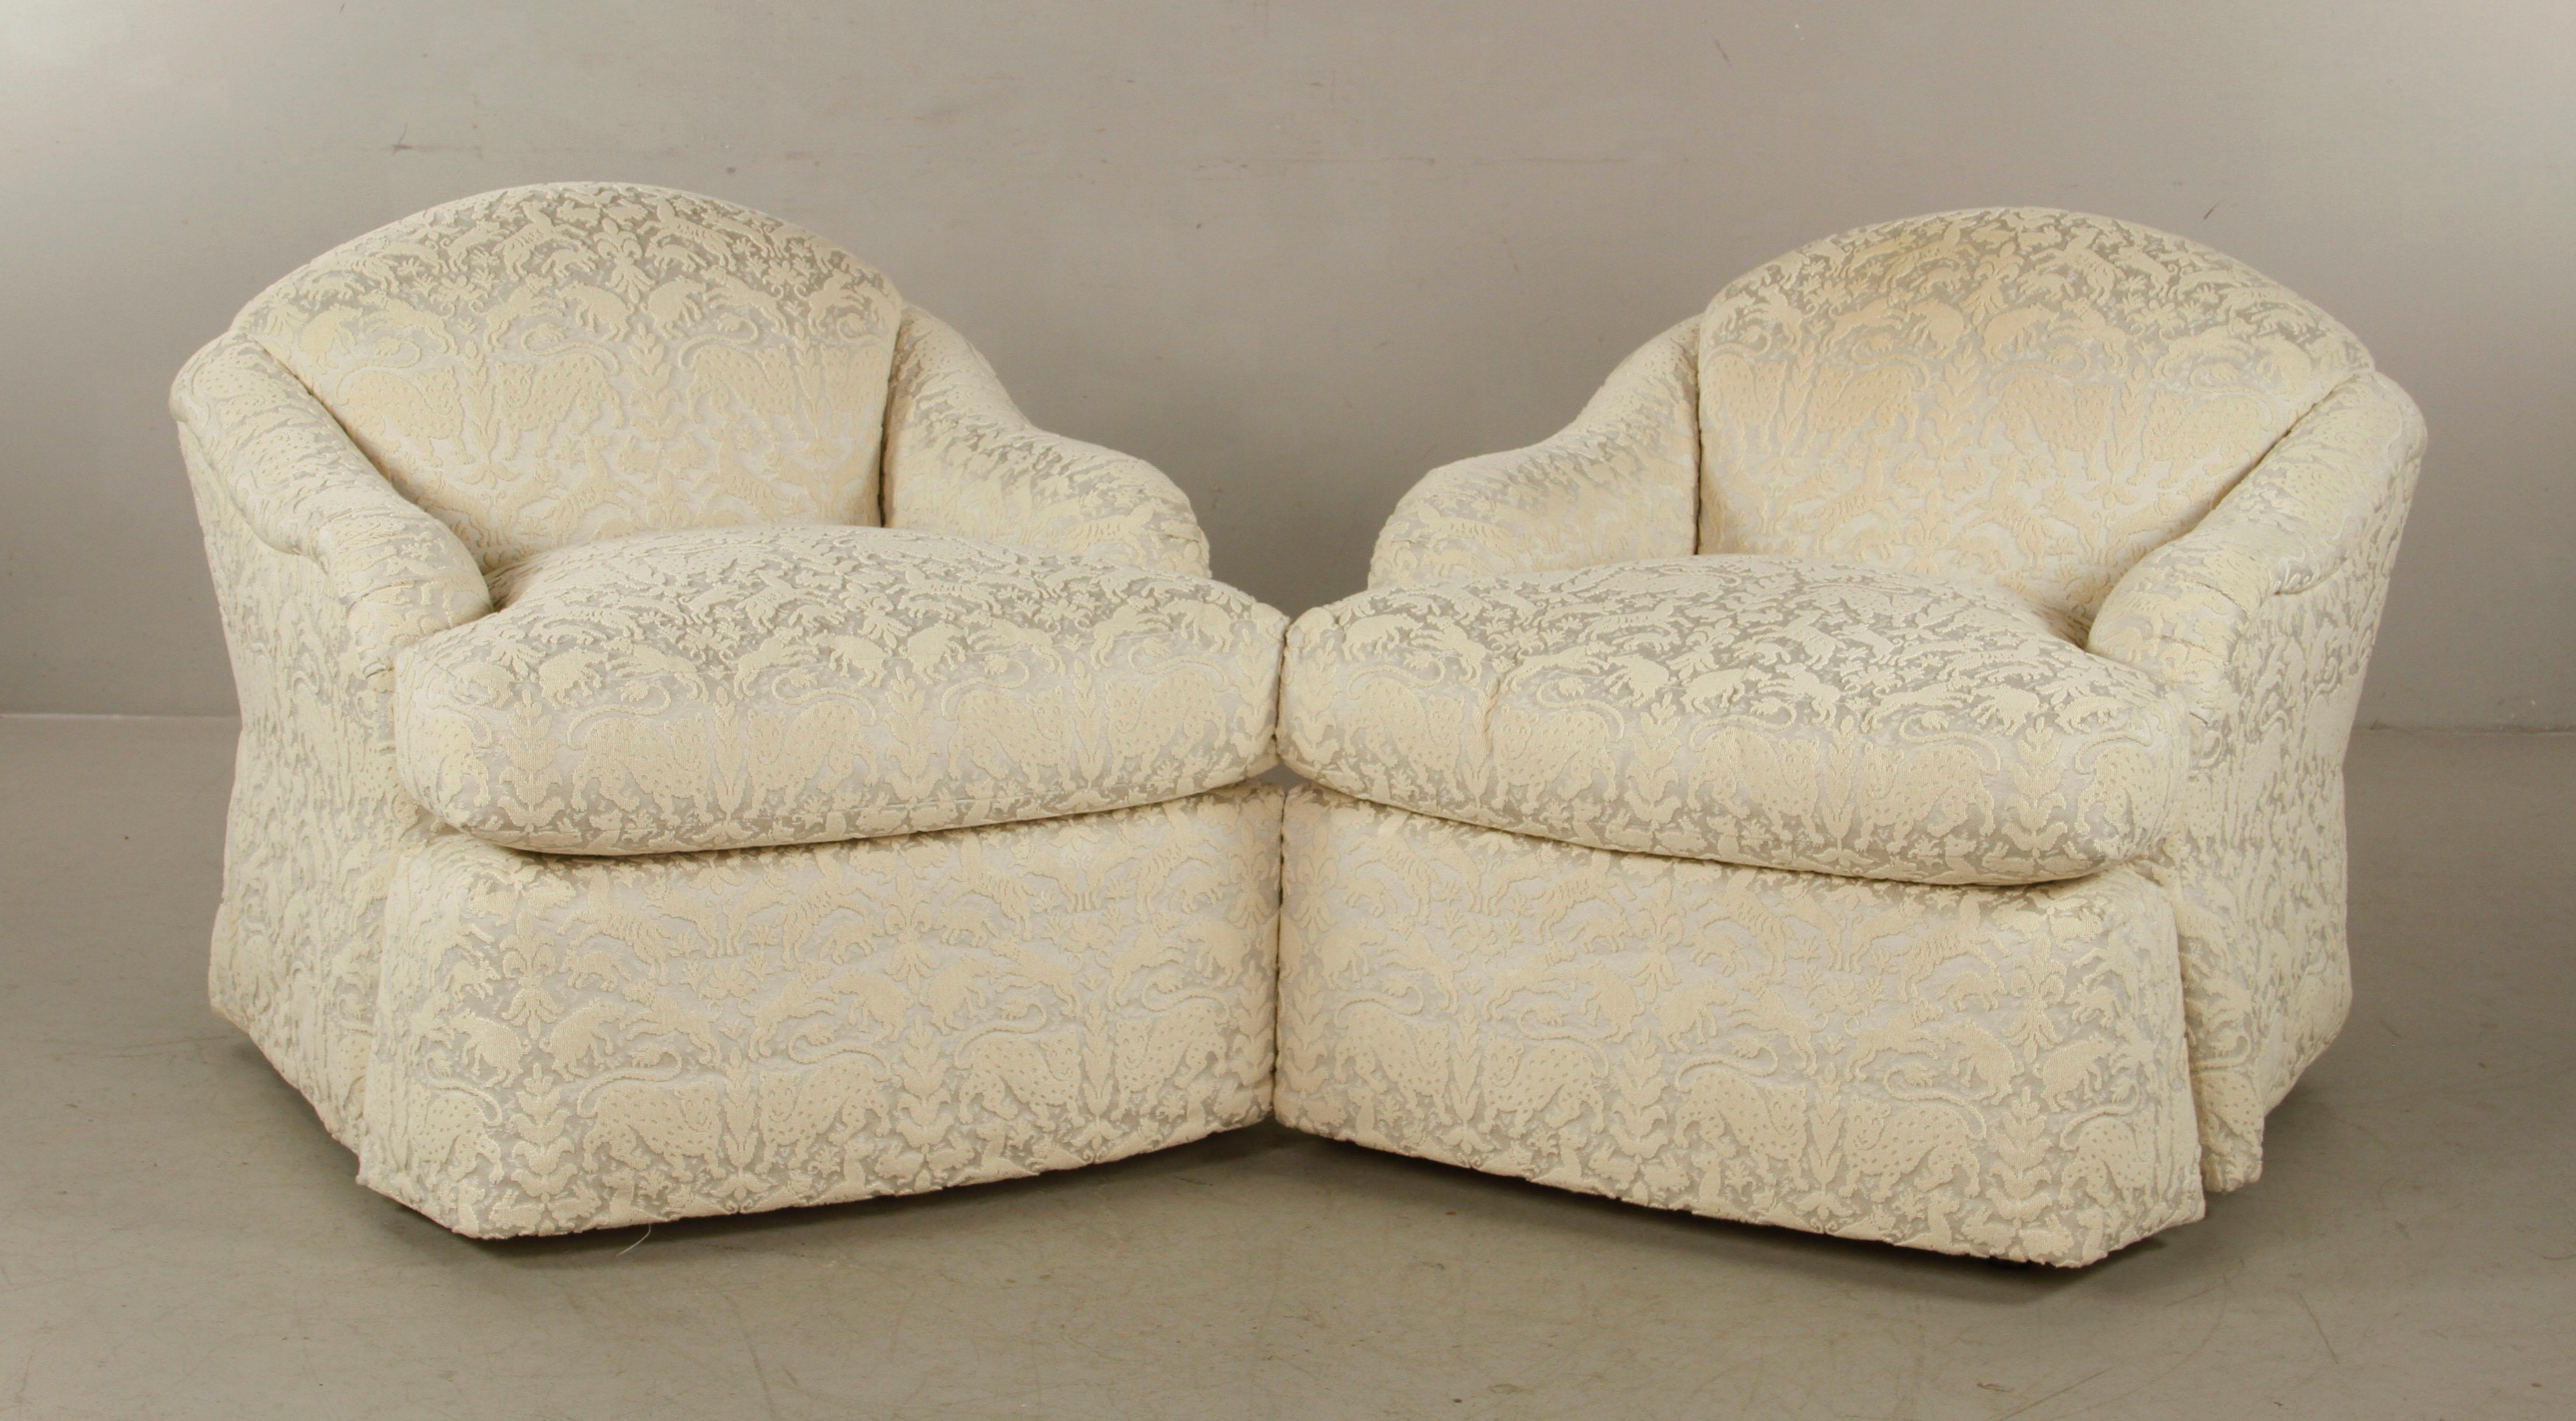 Pair of J. Robert Scott upholstered slope arm club chairs and matching ottoman in off white fabric with wonderful animal sculpted fabric showing lions, dogs rabbits, etc. Brand new ...Sir Gregory Lounge Chairs designed by Sally Sirkin Lewis measures